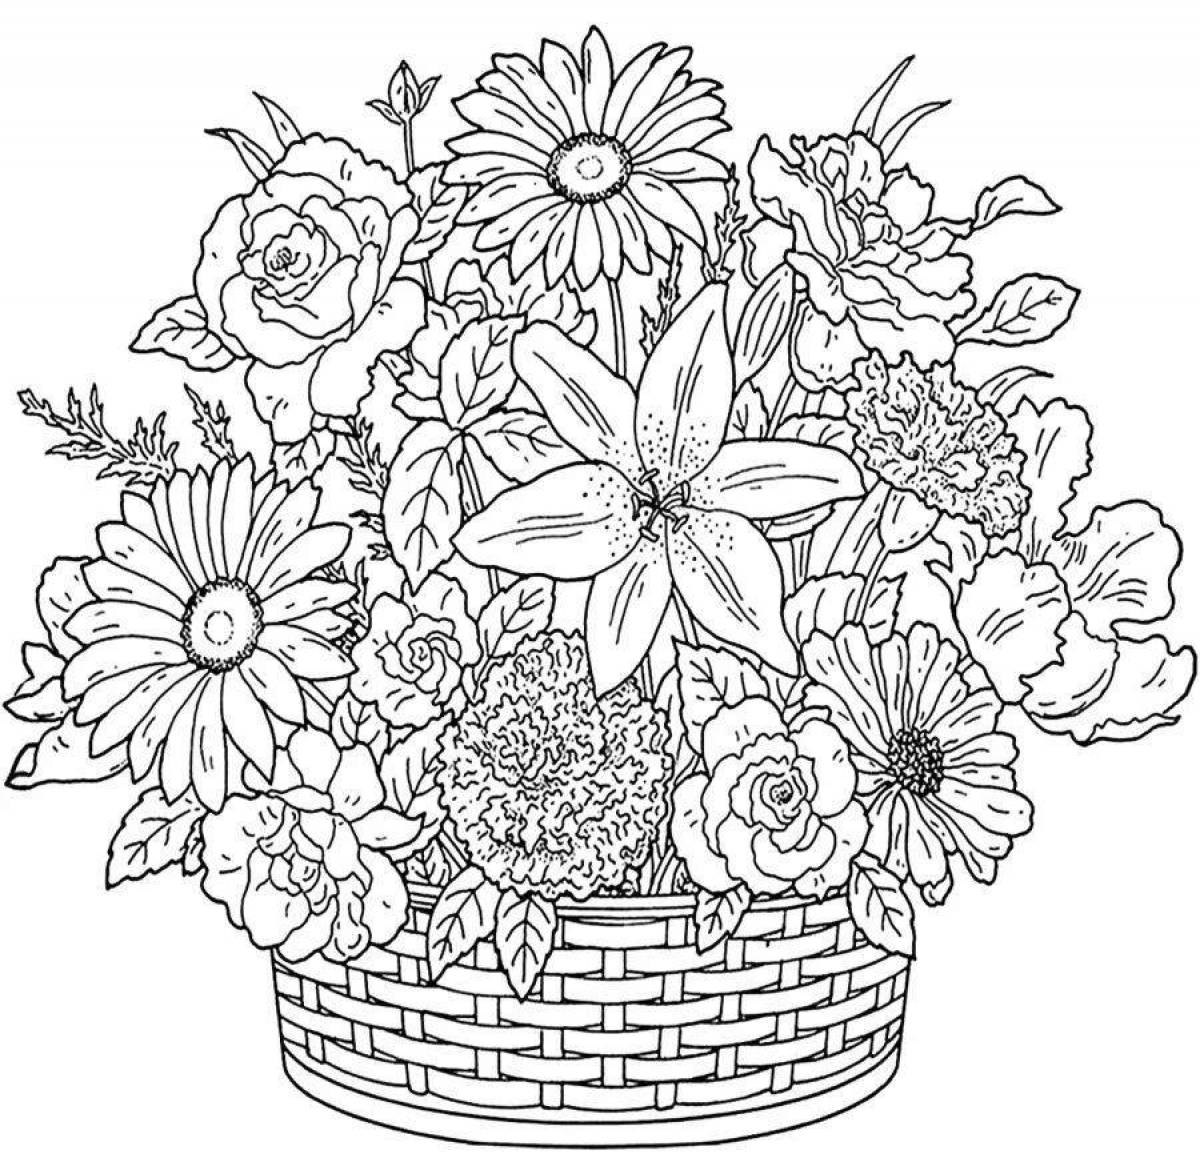 Amazing flower coloring pages